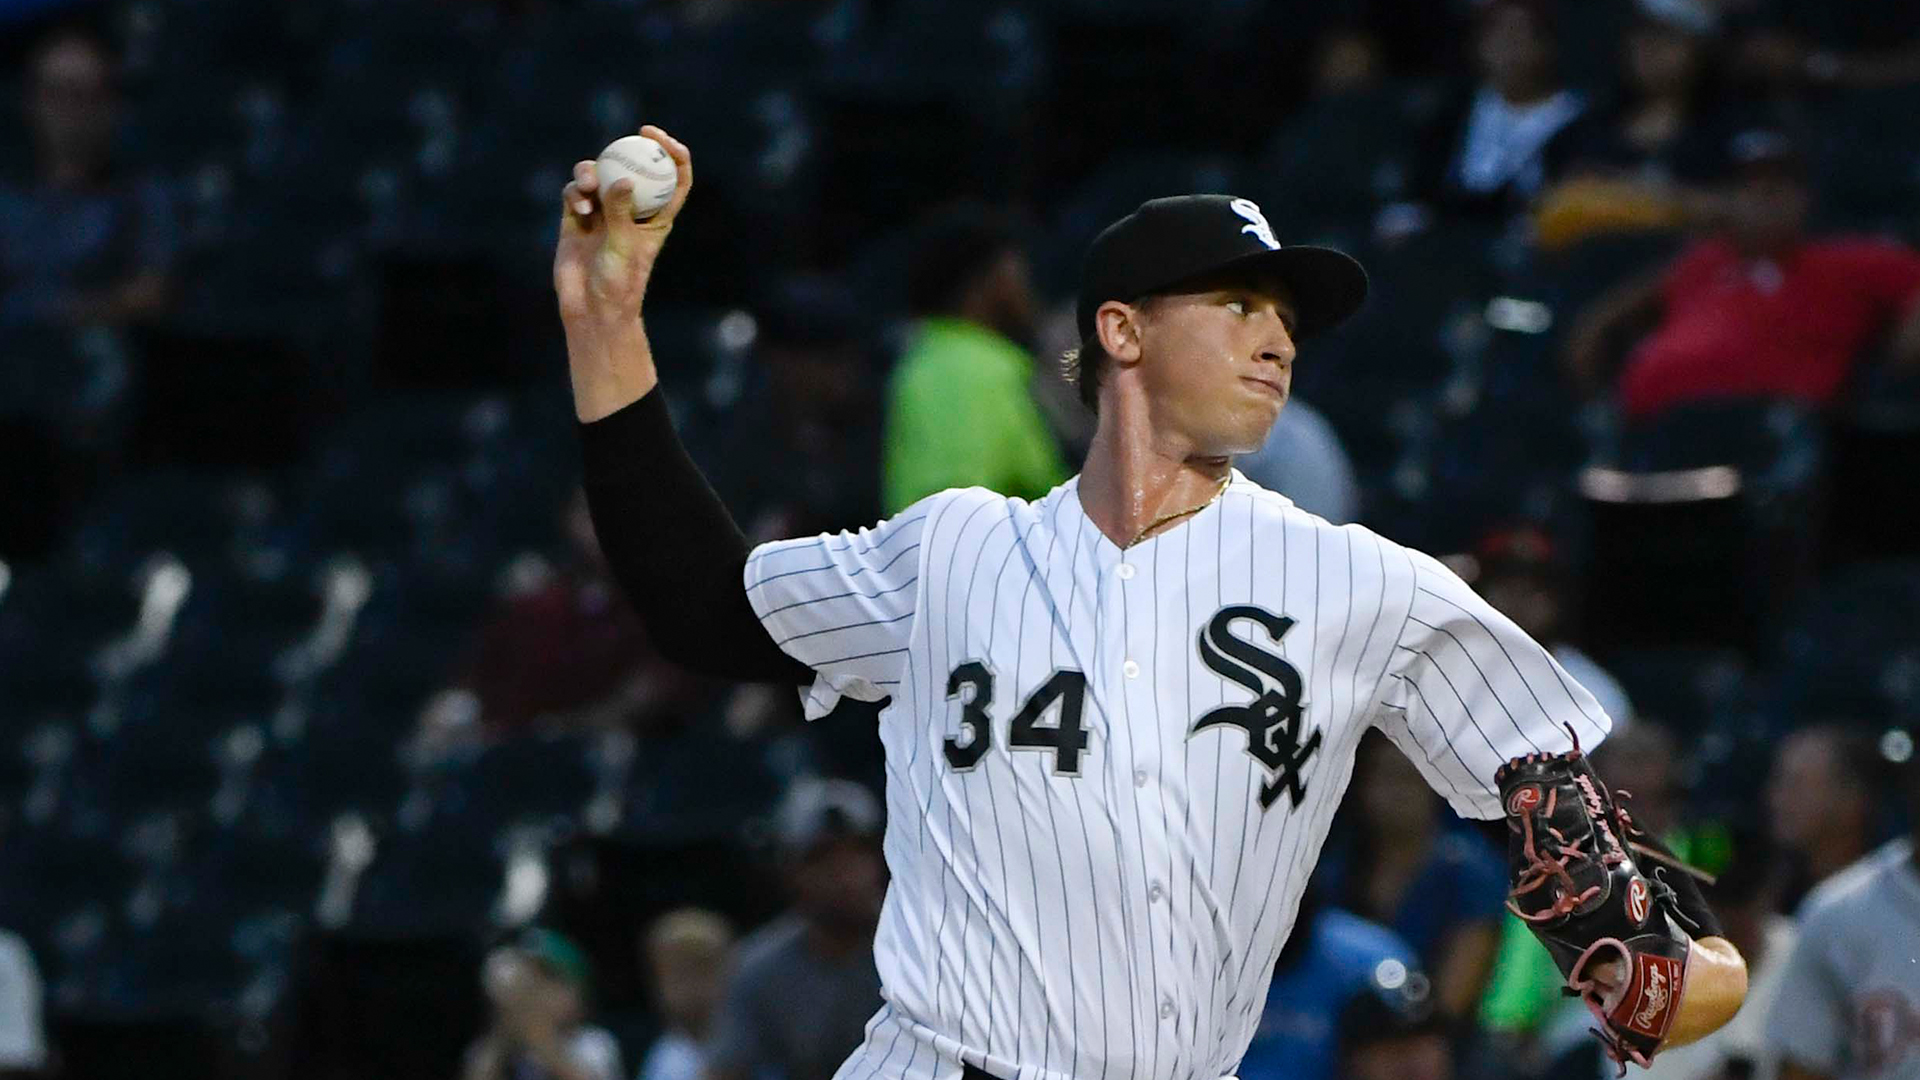 Chicago White Sox's Michael Kopech searching for consistency after